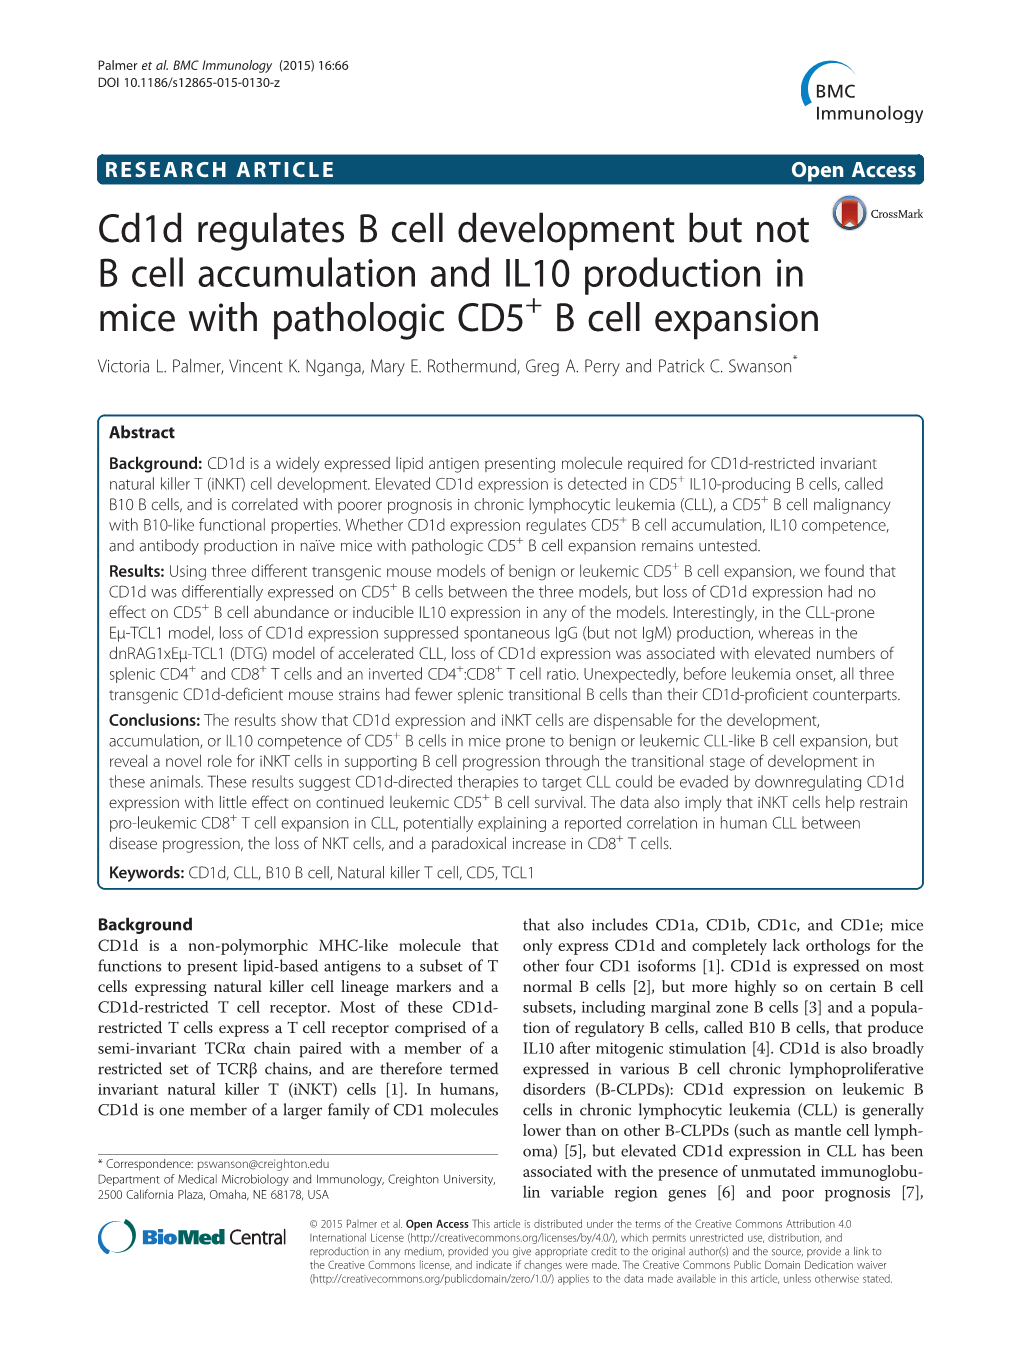 Cd1d Regulates B Cell Development but Not B Cell Accumulation and IL10 Production in Mice with Pathologic CD5+ B Cell Expansion Victoria L